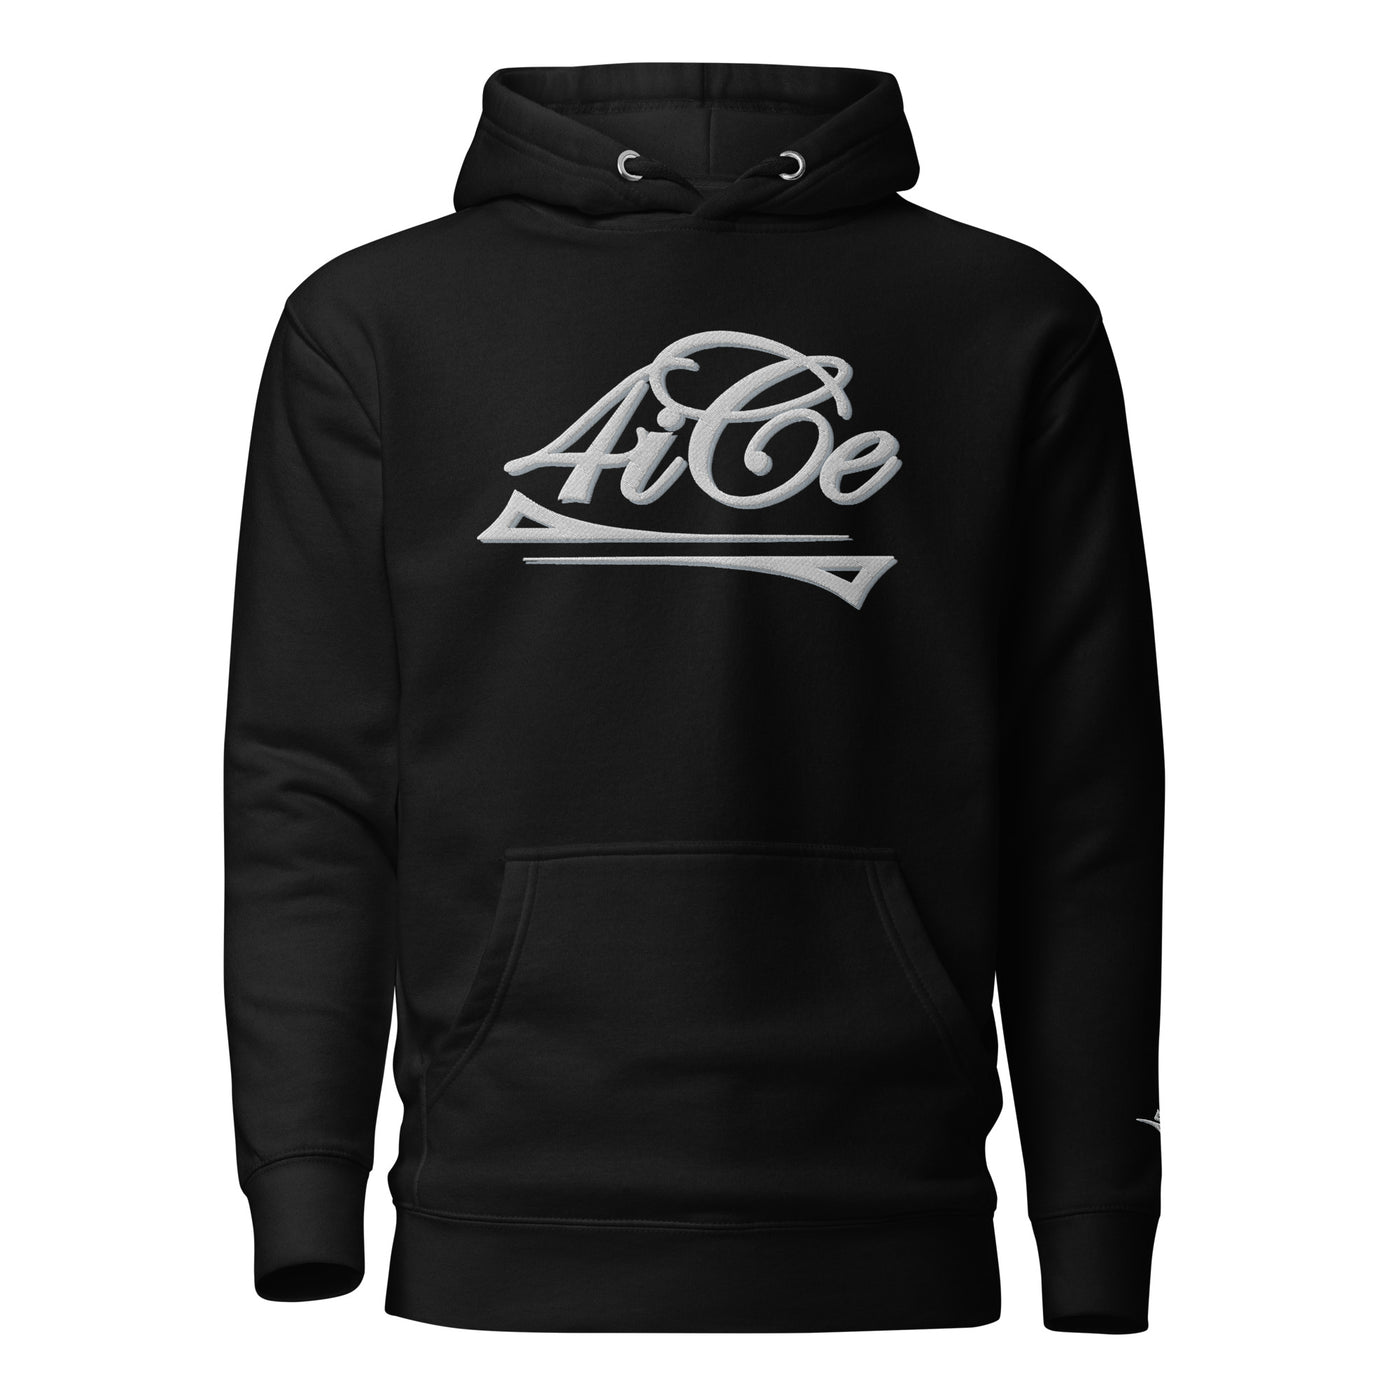  4iCe® Elite Boxing black embroidered hoodie front view